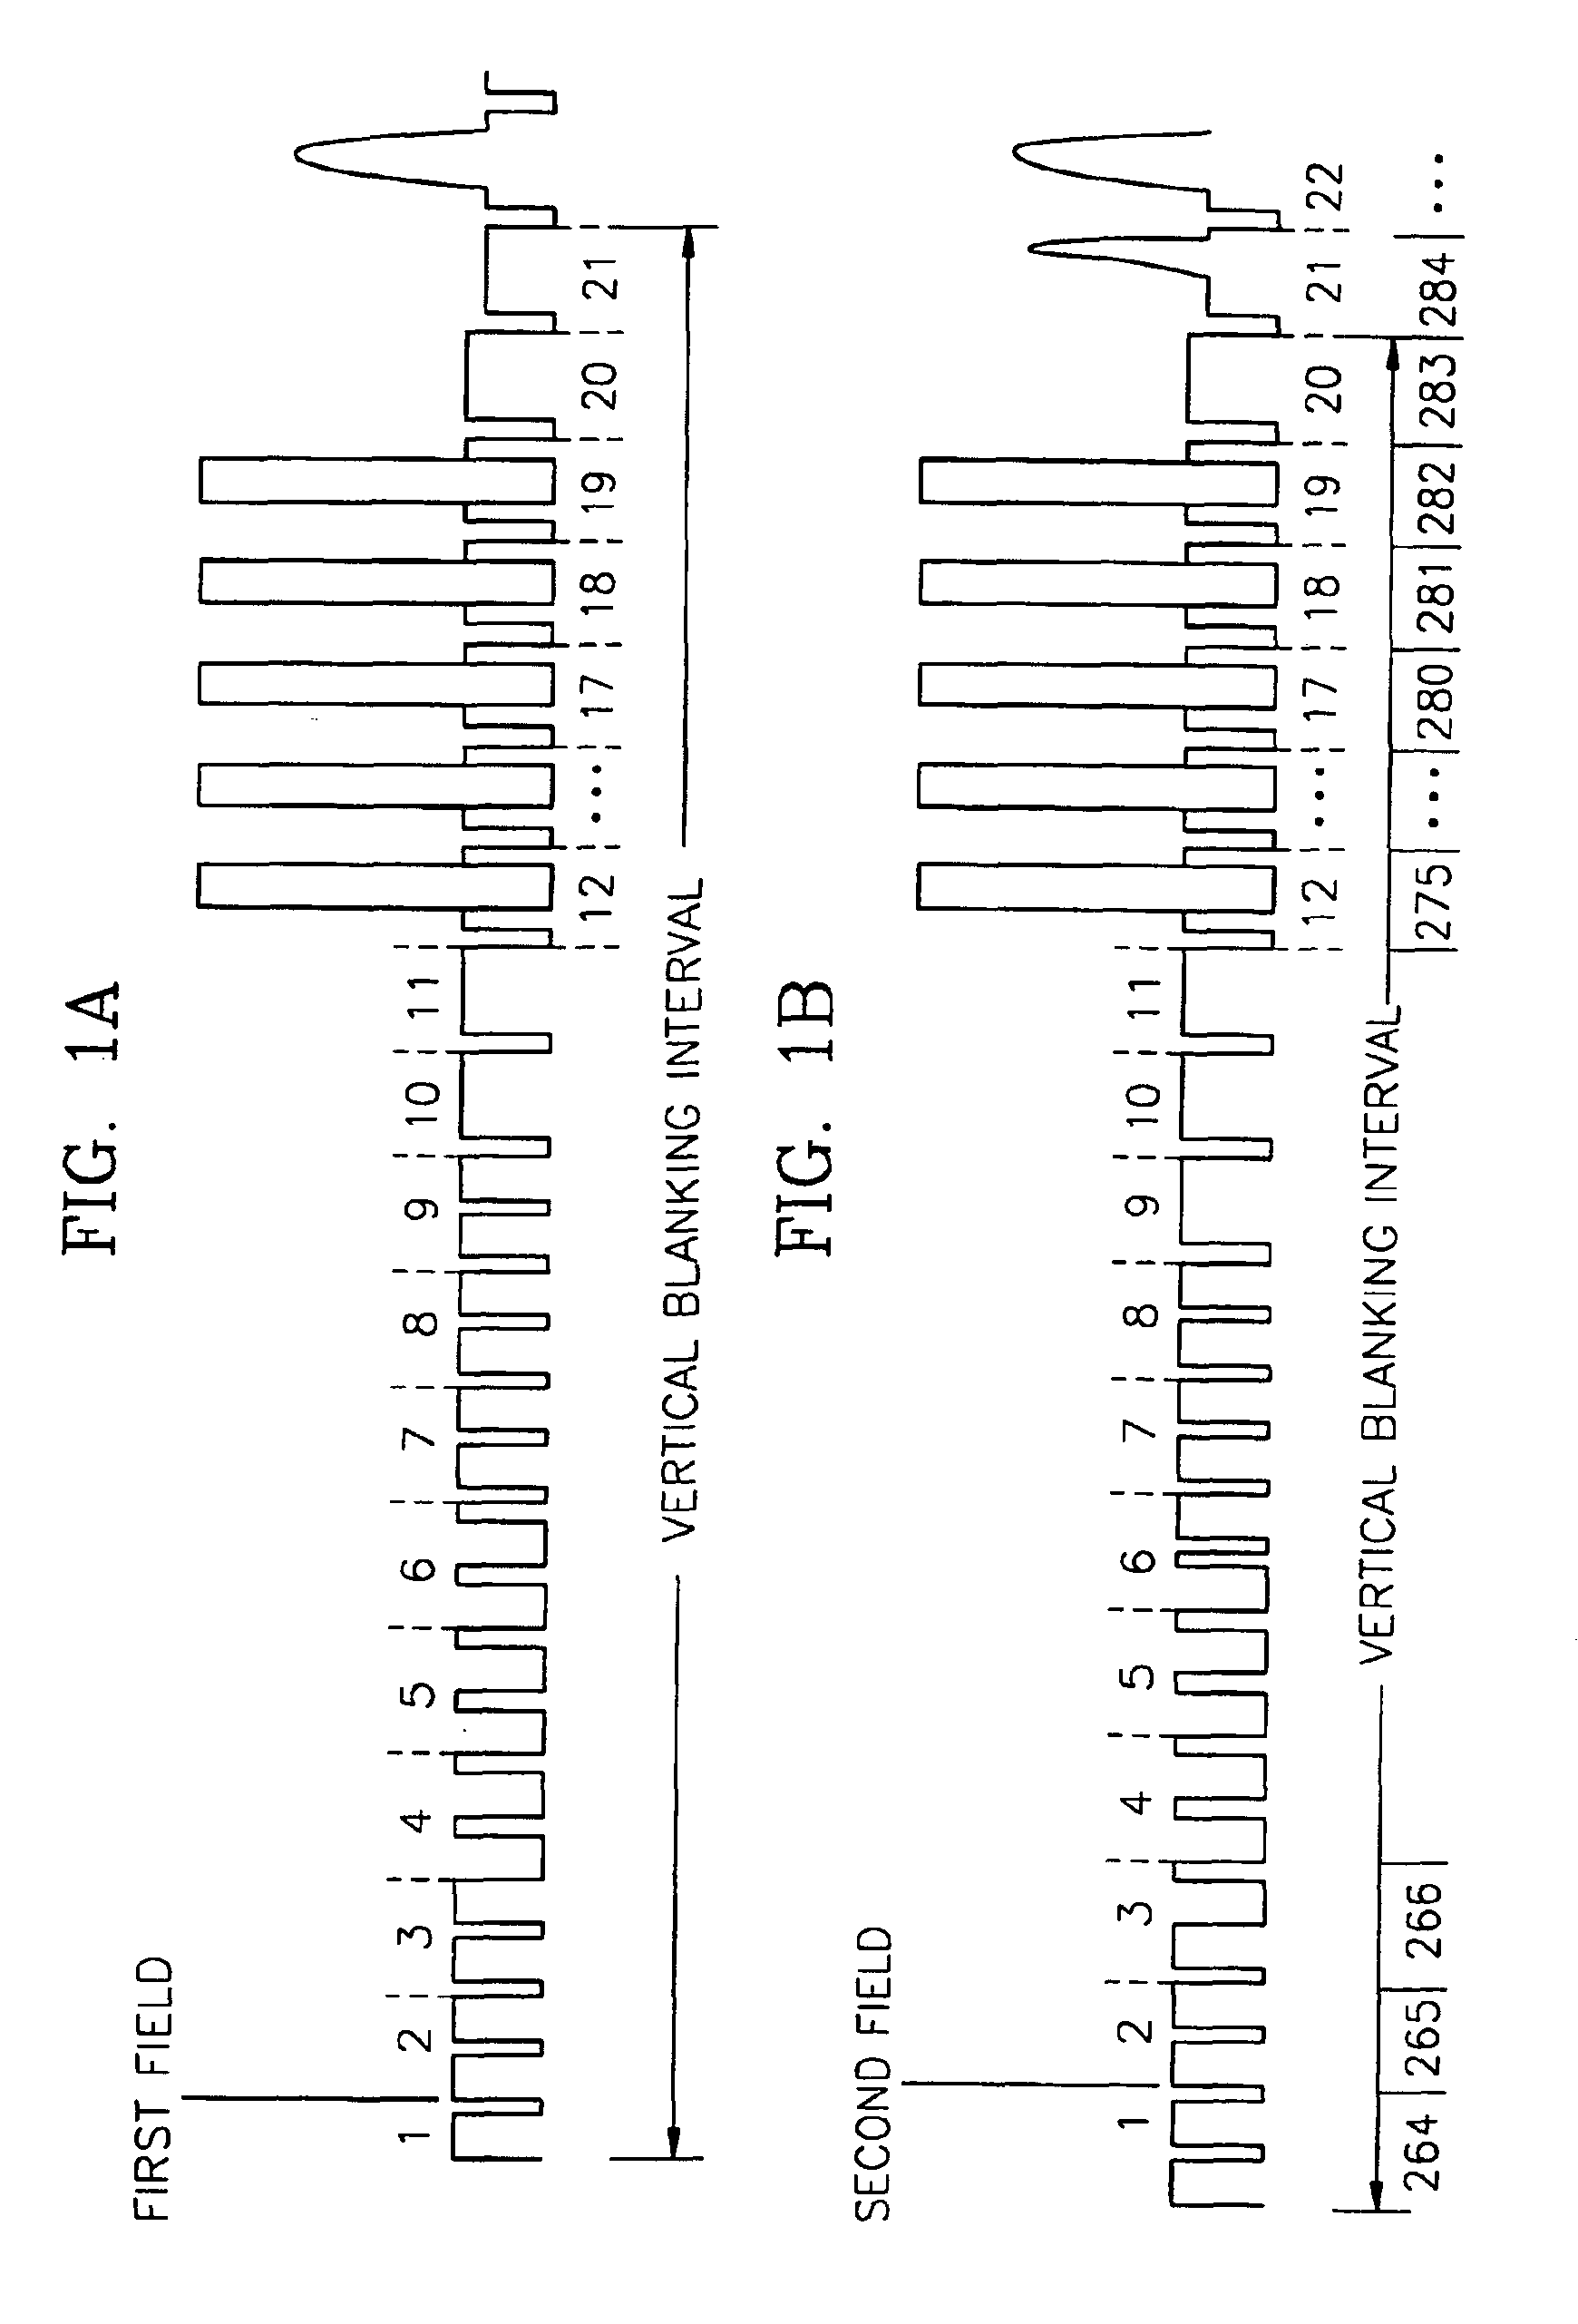 Apparatus and method for controlling copy of video signal